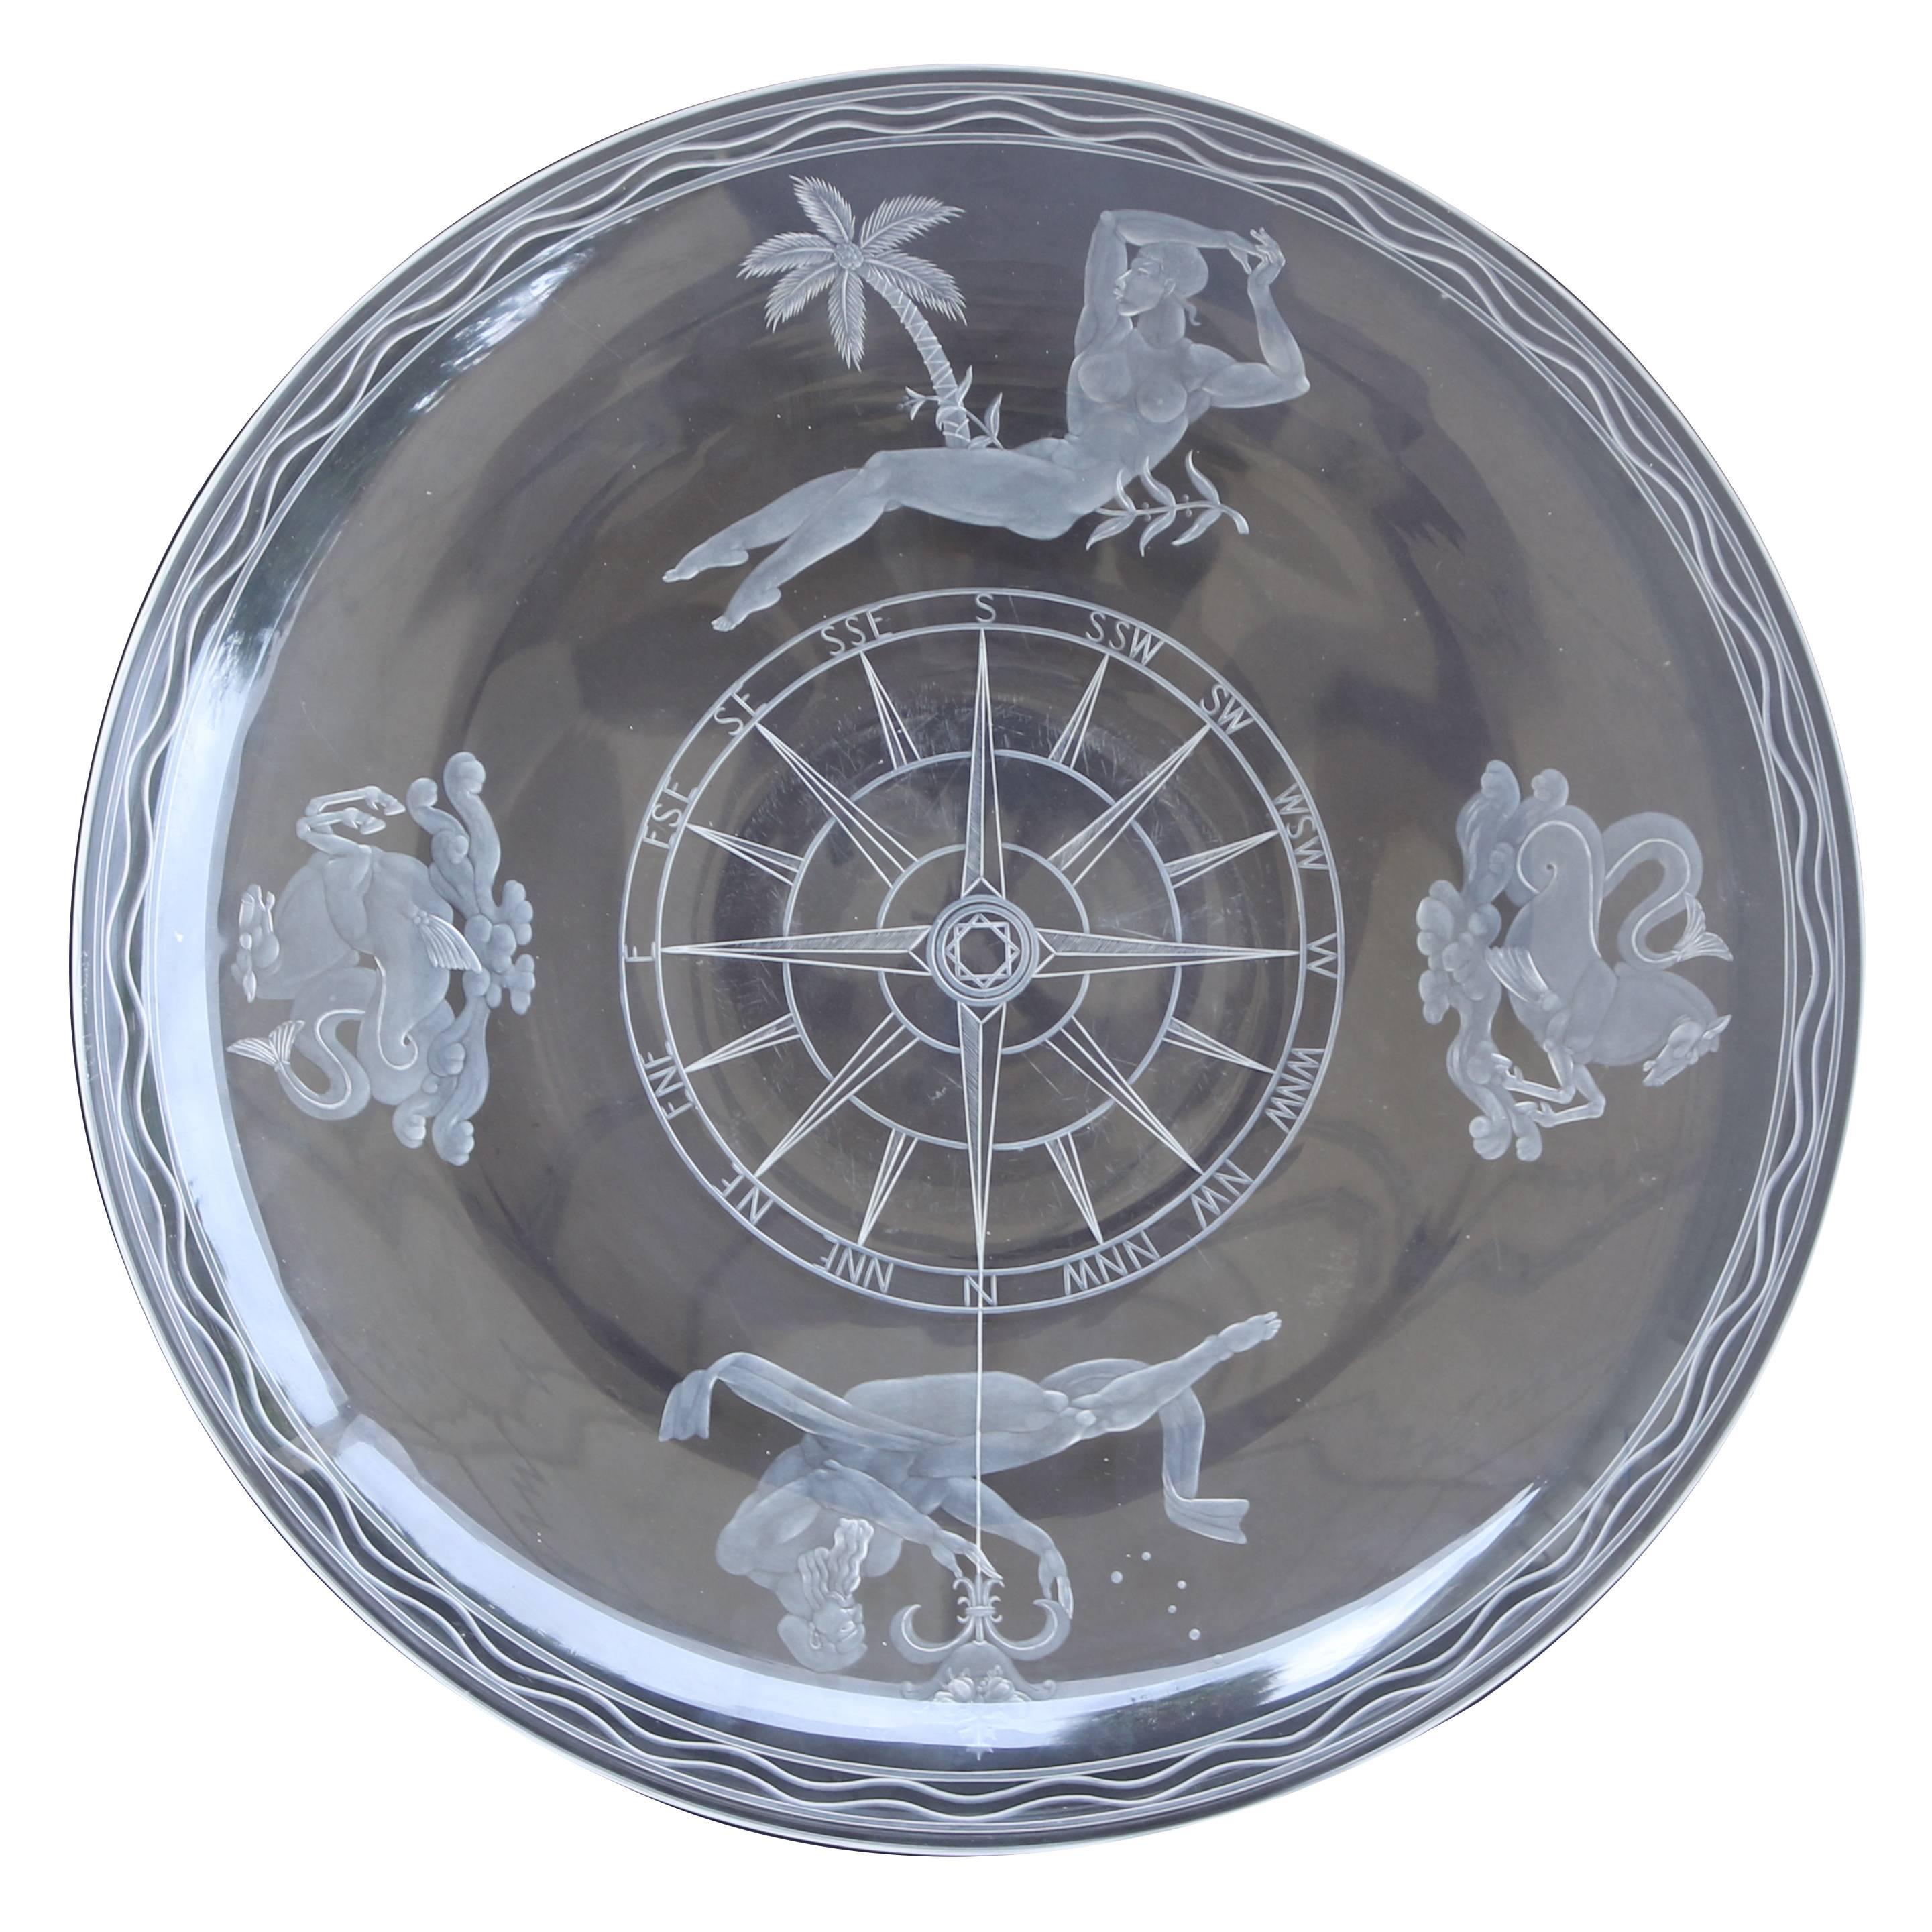 
American Glass created in 1937 in Corning New York by Steuben, the finest quality glass objects ever fabricated!
Own an inspired museum American glass piece 'Mariners Bowl' very rare extraordinary large signed and dated 1937 Steuben mythical carved